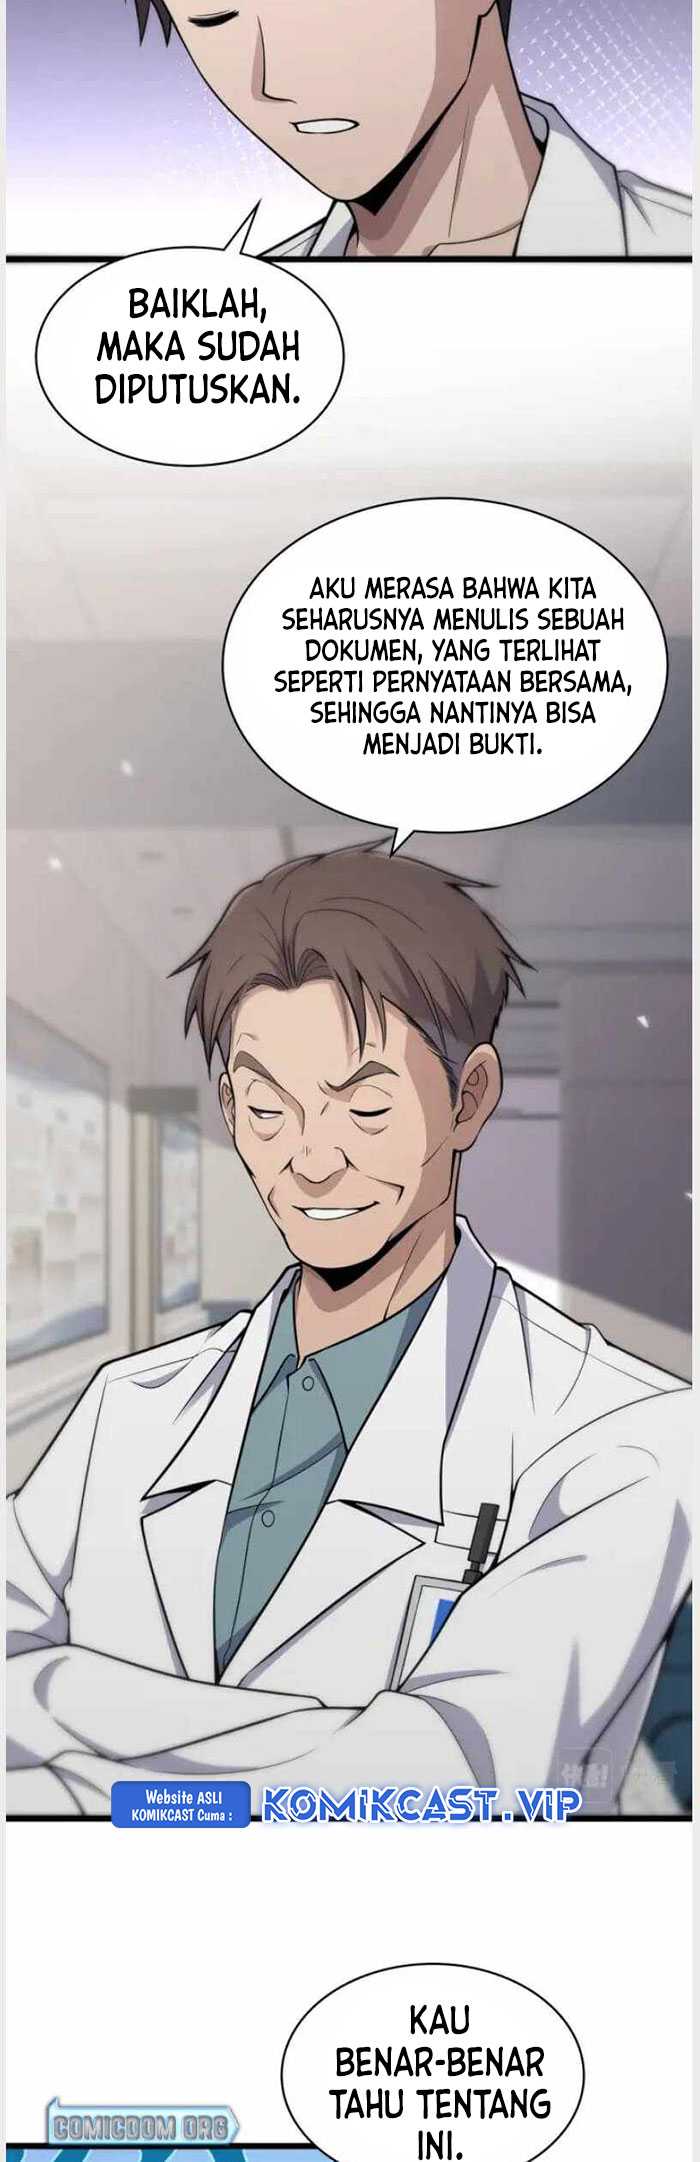 Great Doctor Ling Ran Chapter 126